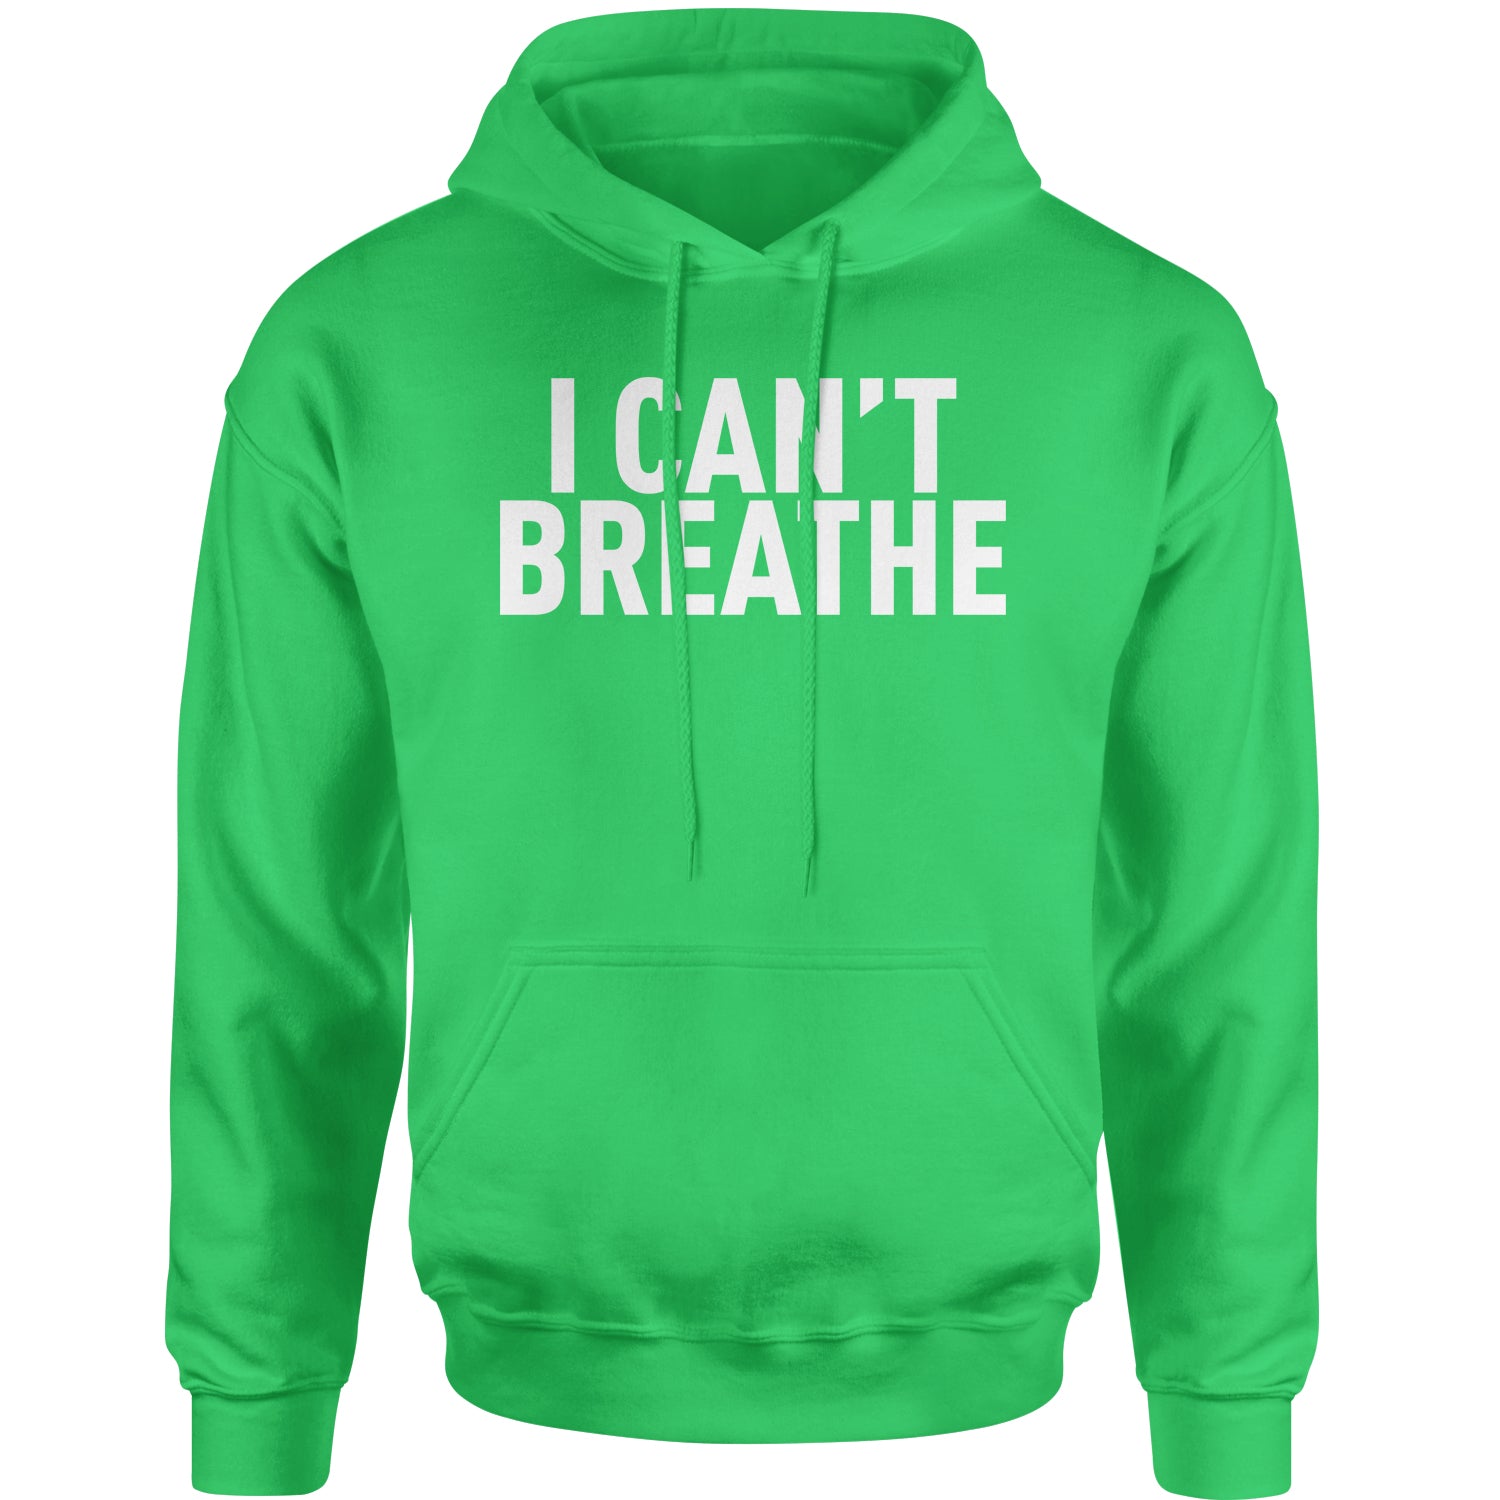 I Can't Breathe Social Justice Adult Hoodie Sweatshirt african, africanamerican, american, black, blm, breonna, floyd, george, life, lives, matter, taylor by Expression Tees